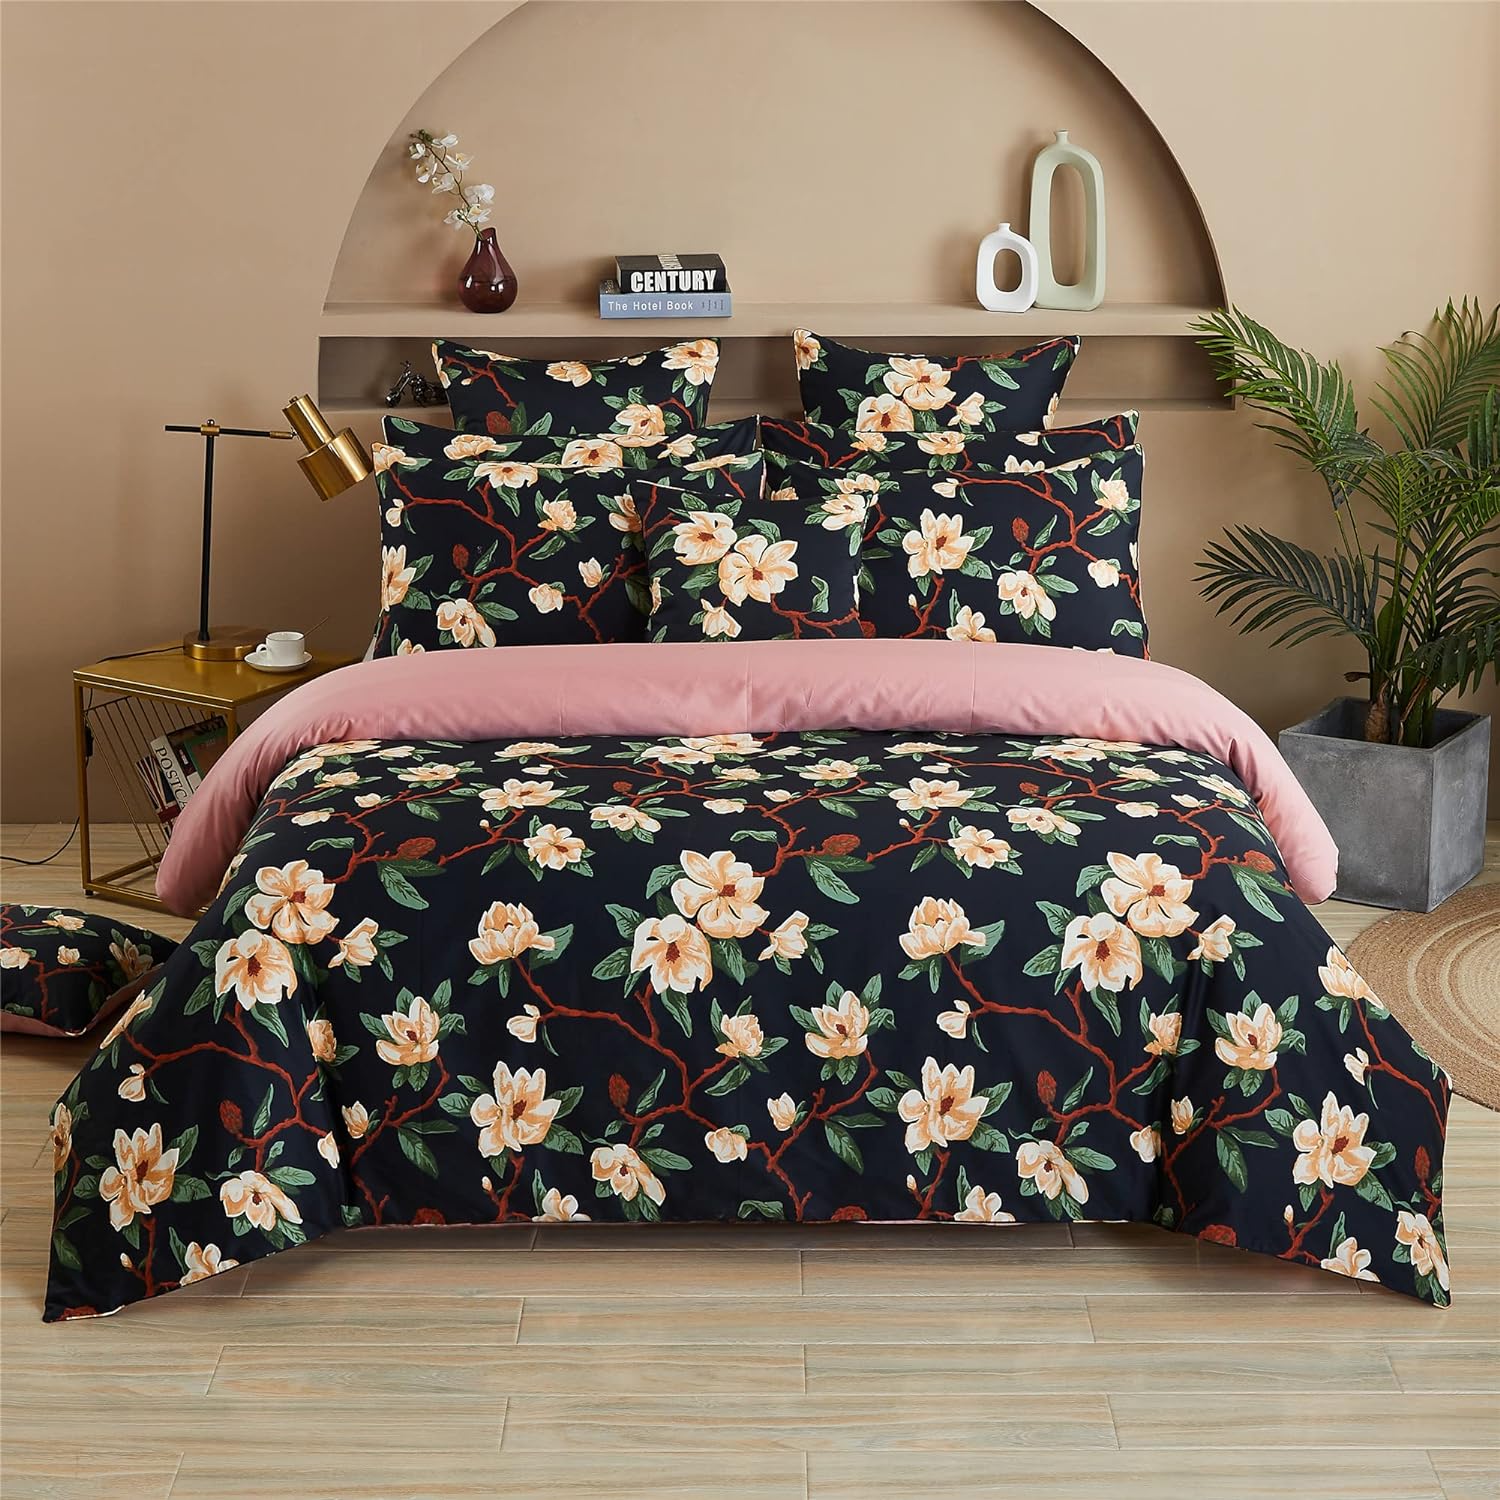 FADFAY Duvet Cover Set Queen Shabby Black and Pink Floral Bedding Elegant Peony Farmhouse Bedding 800 Thread Count 100% Egyptian Cotton Comforter Cover Set with Hidden Zipper Closure, 3Pcs-Queen Size